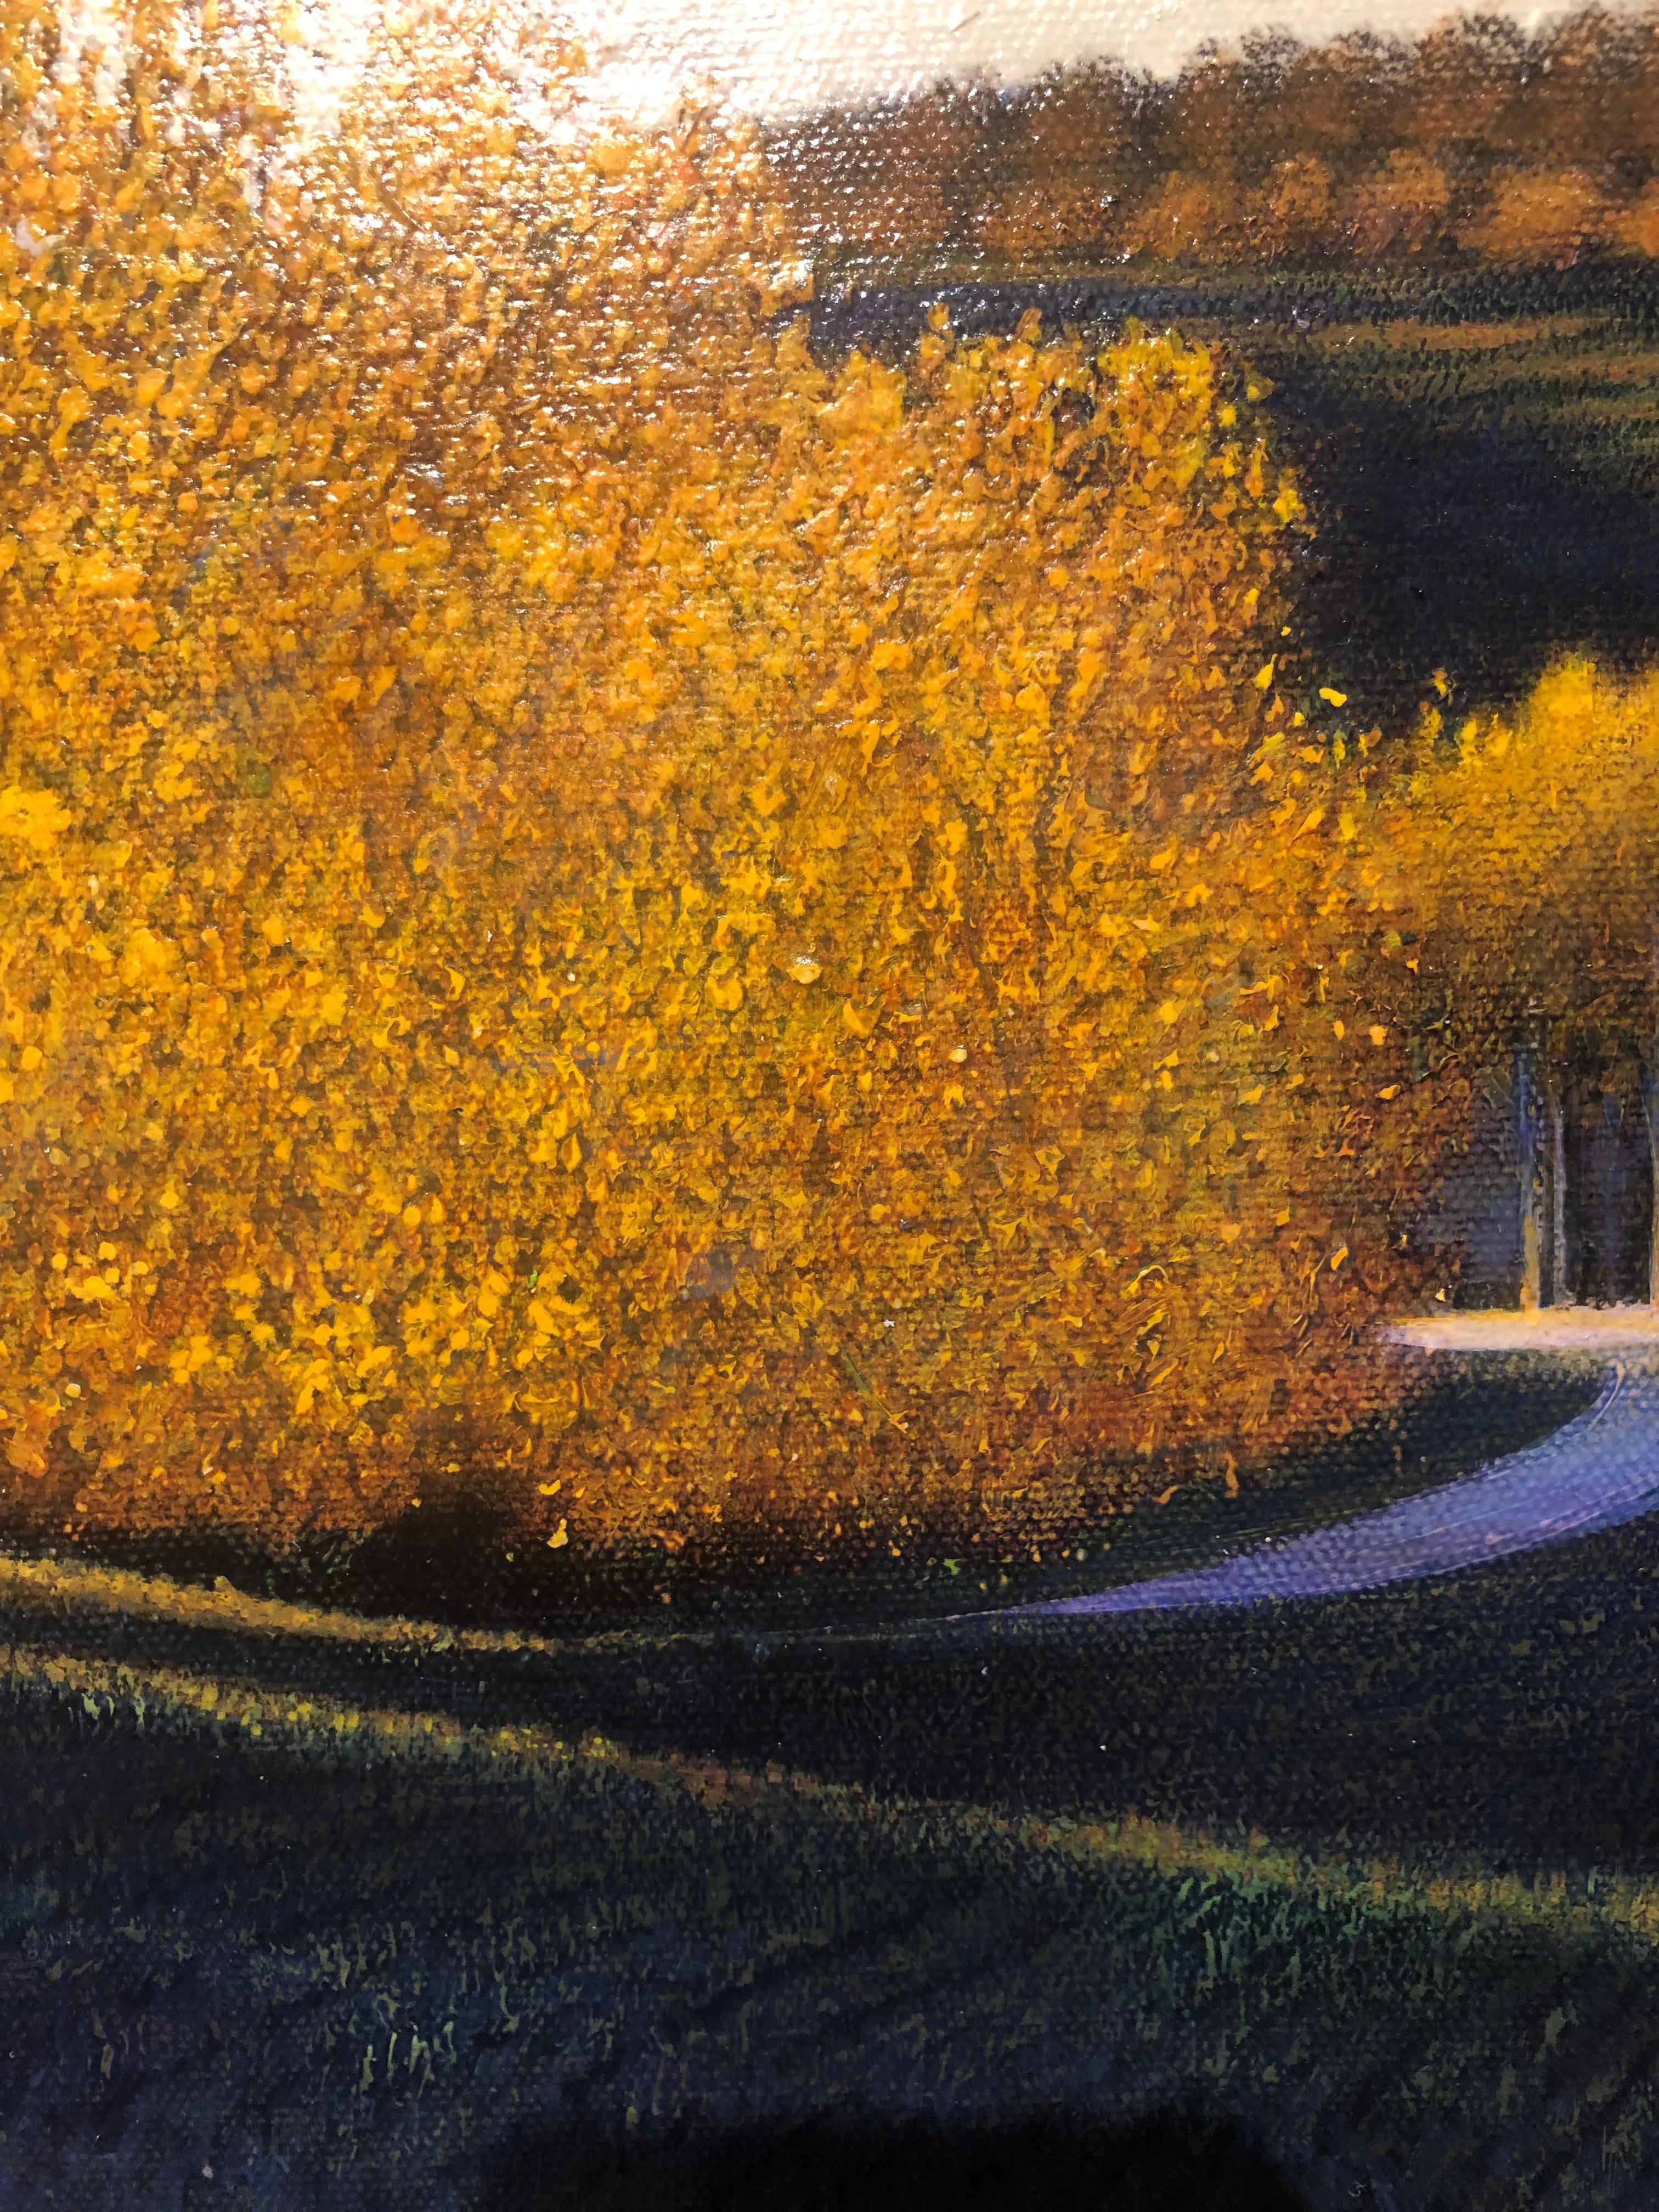 The Color of Home, Original Oil Painting, Glowing Autumn Foliage on Country Road 5